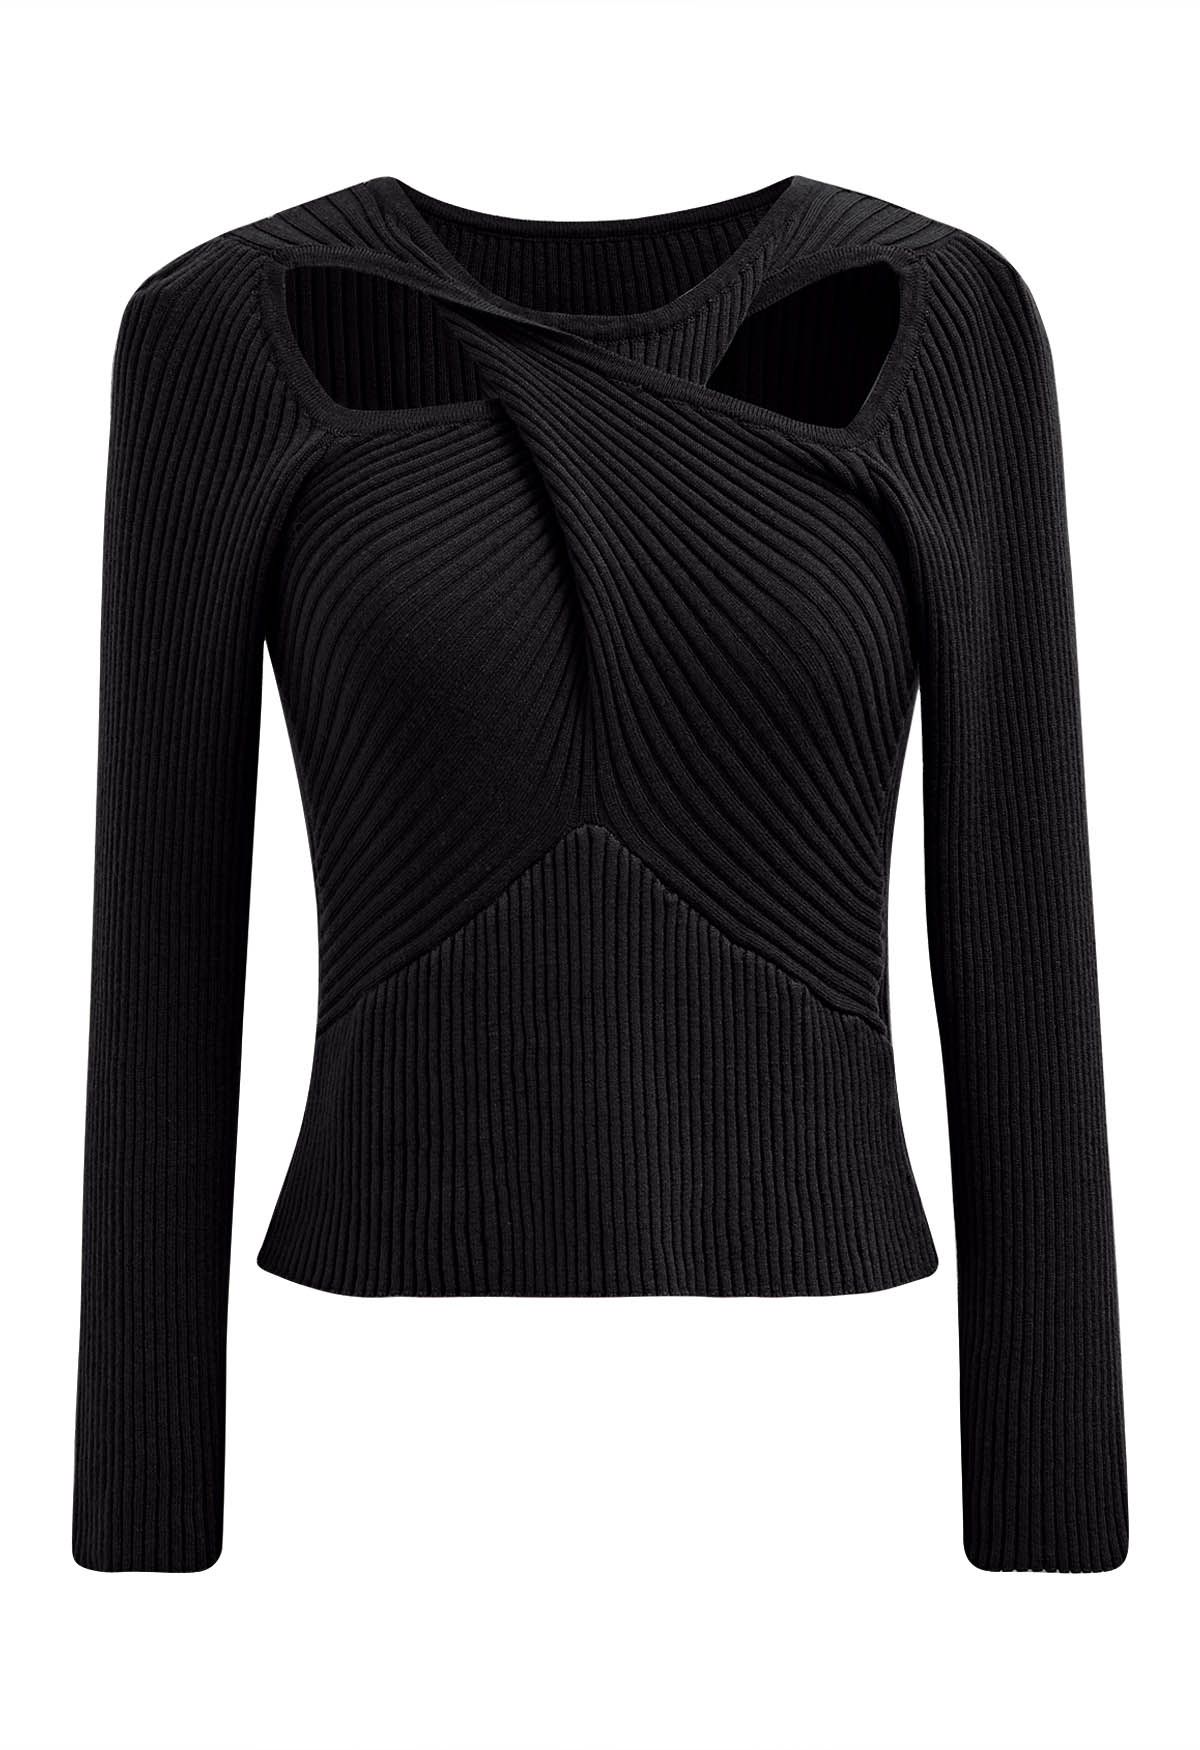 Twist Cutout Neck Ribbed Knit Top in Black